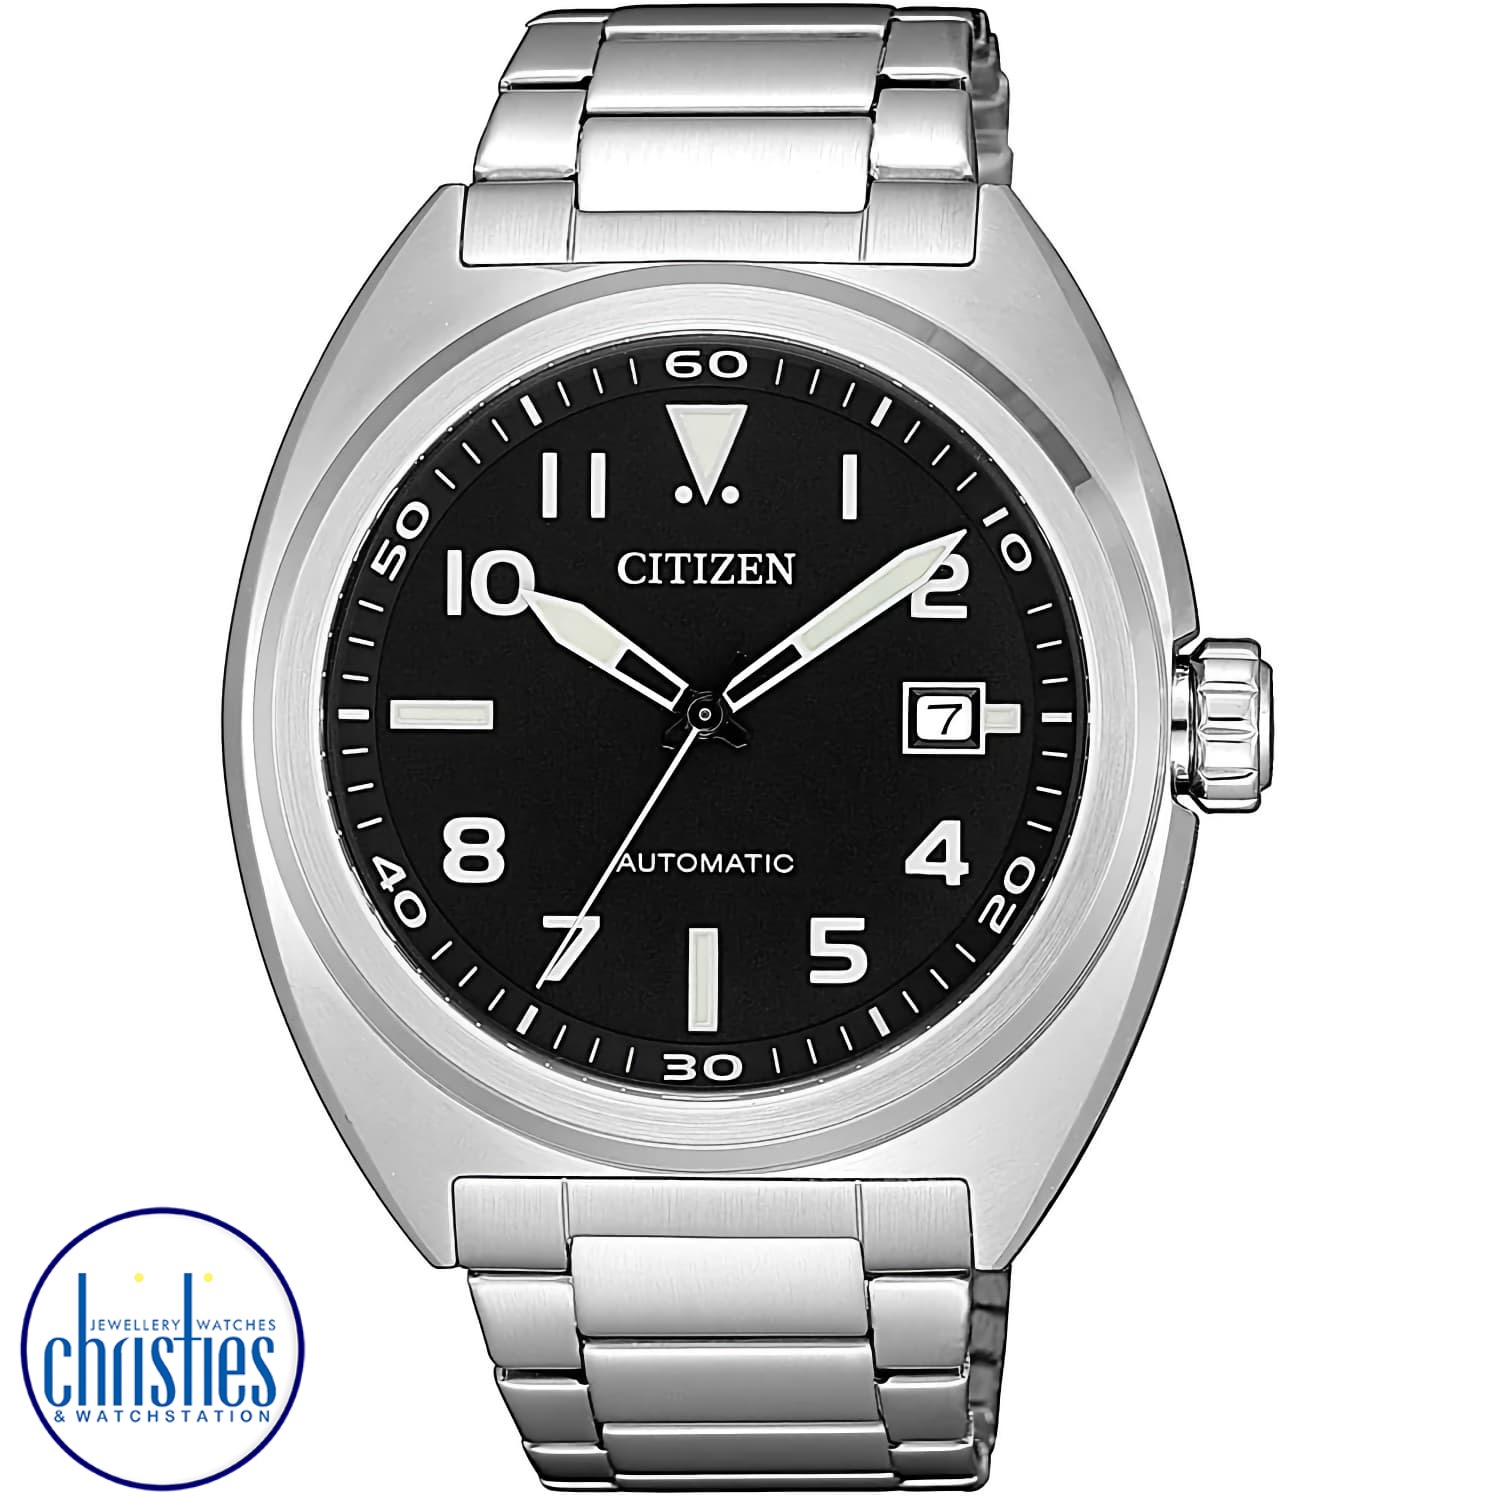 NJ0100-89E CITIZEN Automatic Watch. This gents watch is a new member of the Citizen Mechanical Collection.